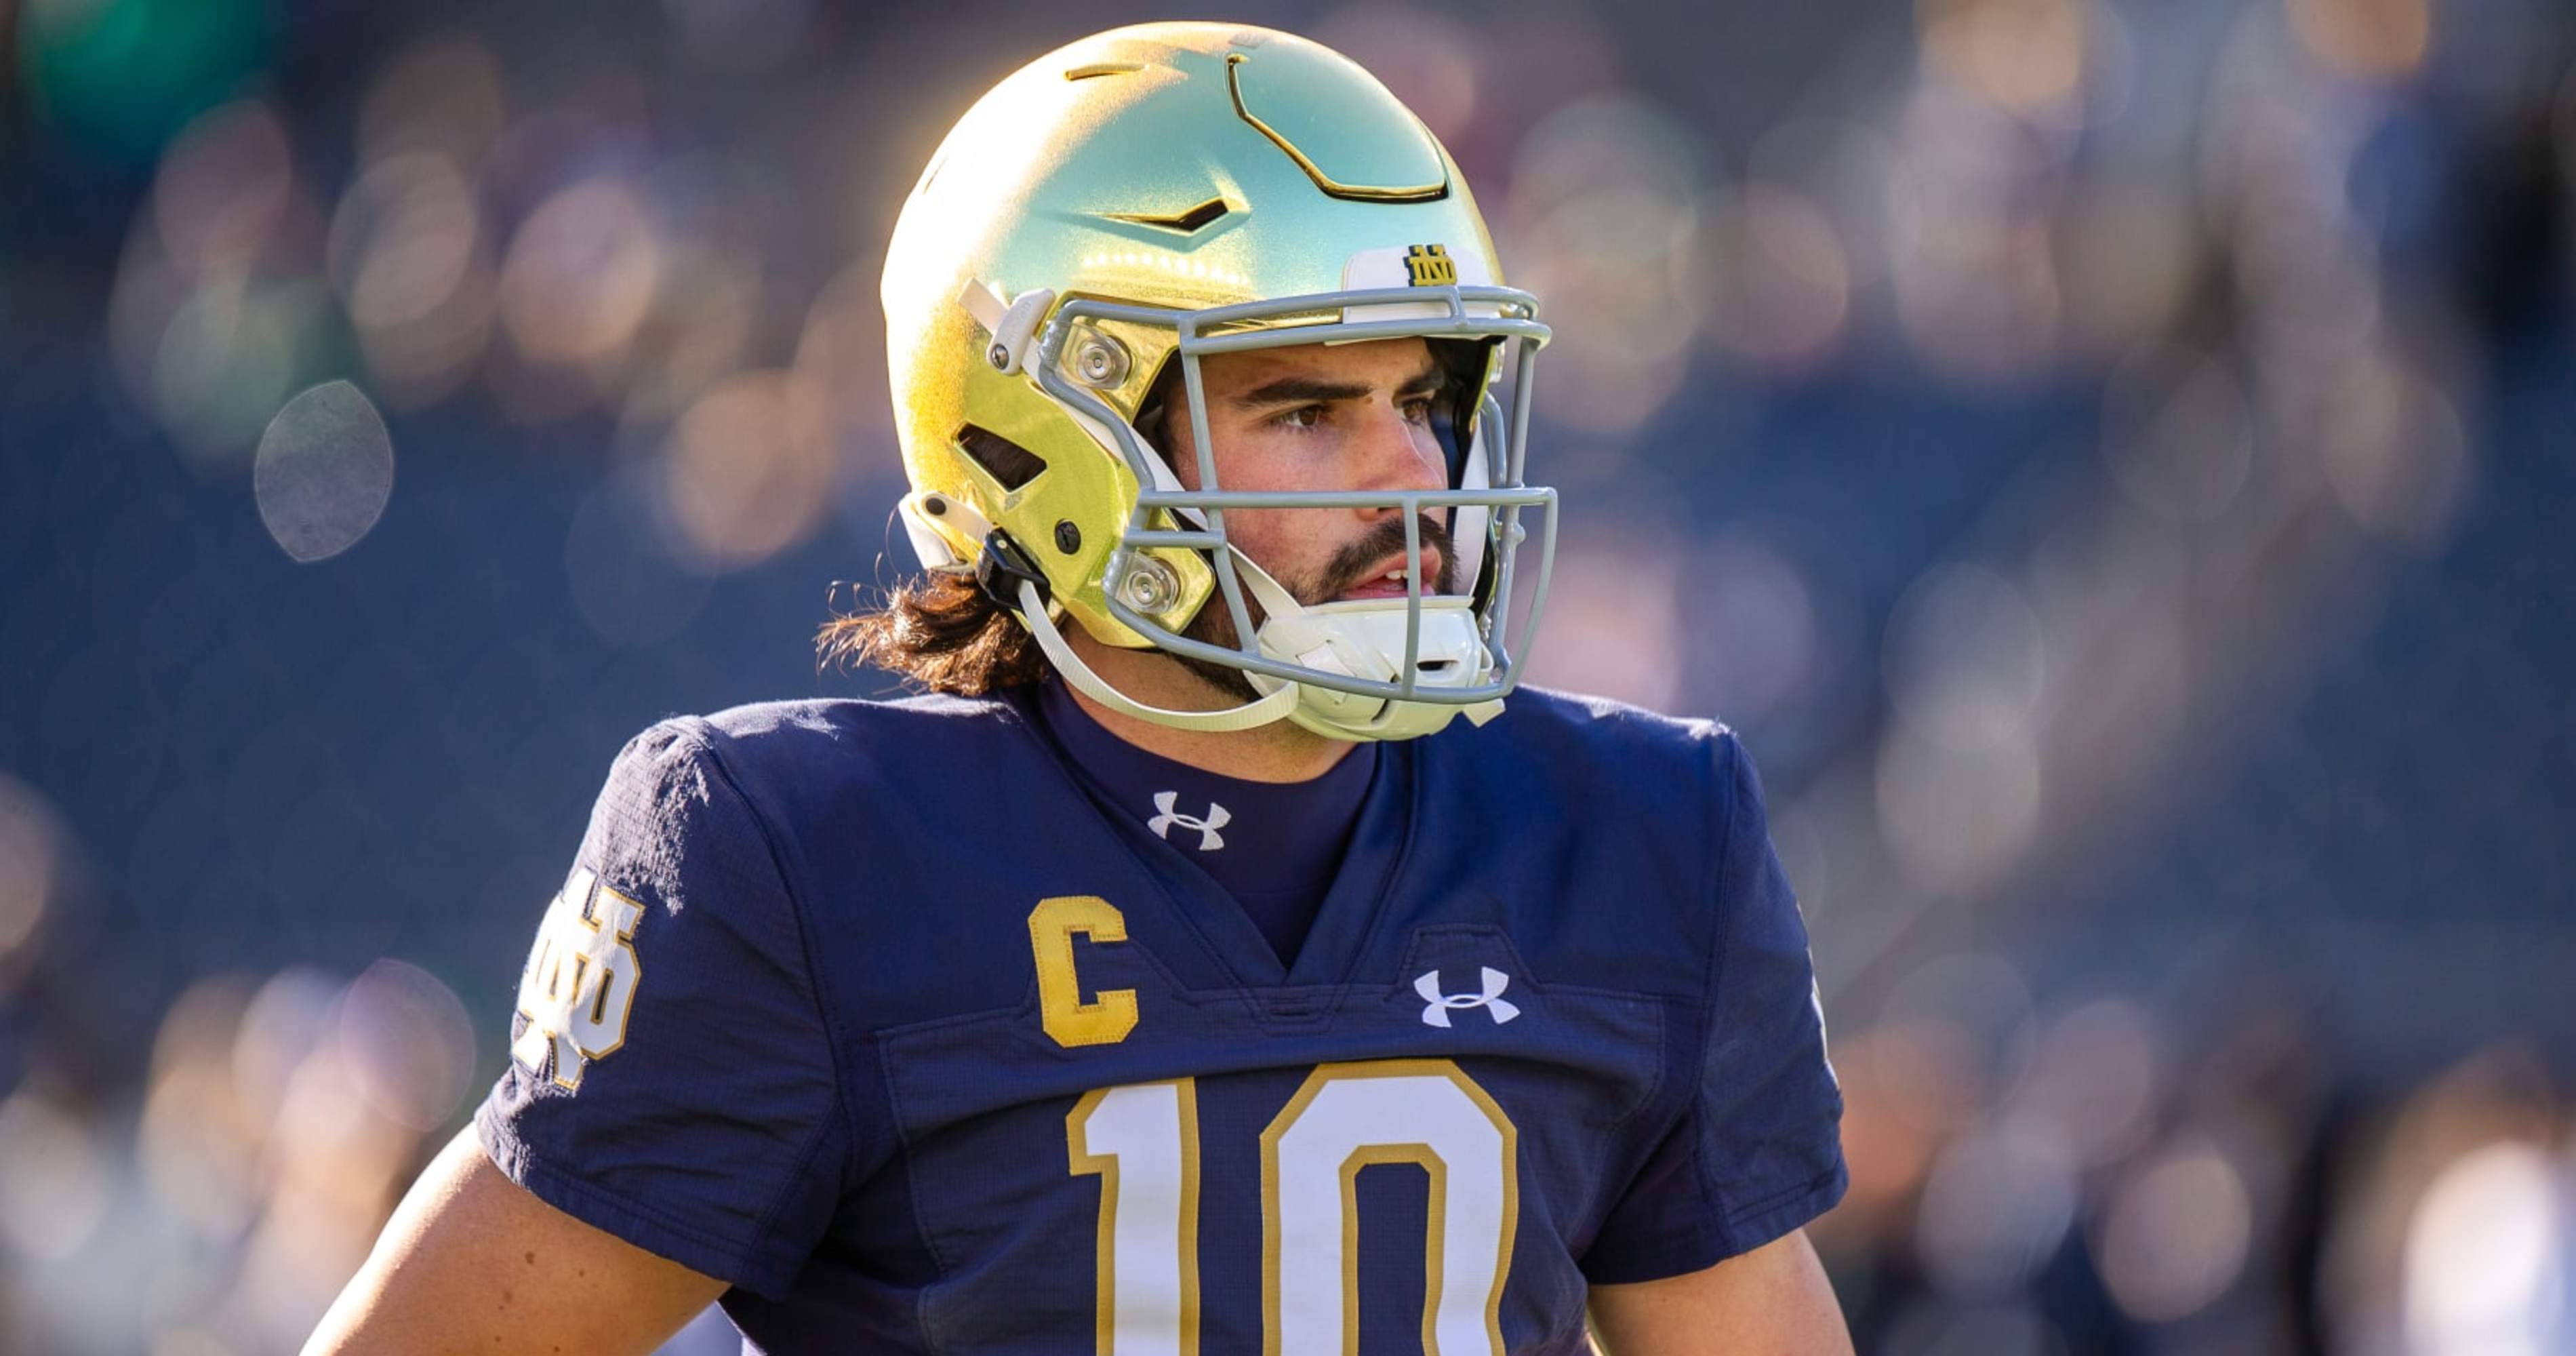 Three way-too-early Riley Leonard bold predictions after transferring to  Notre Dame football